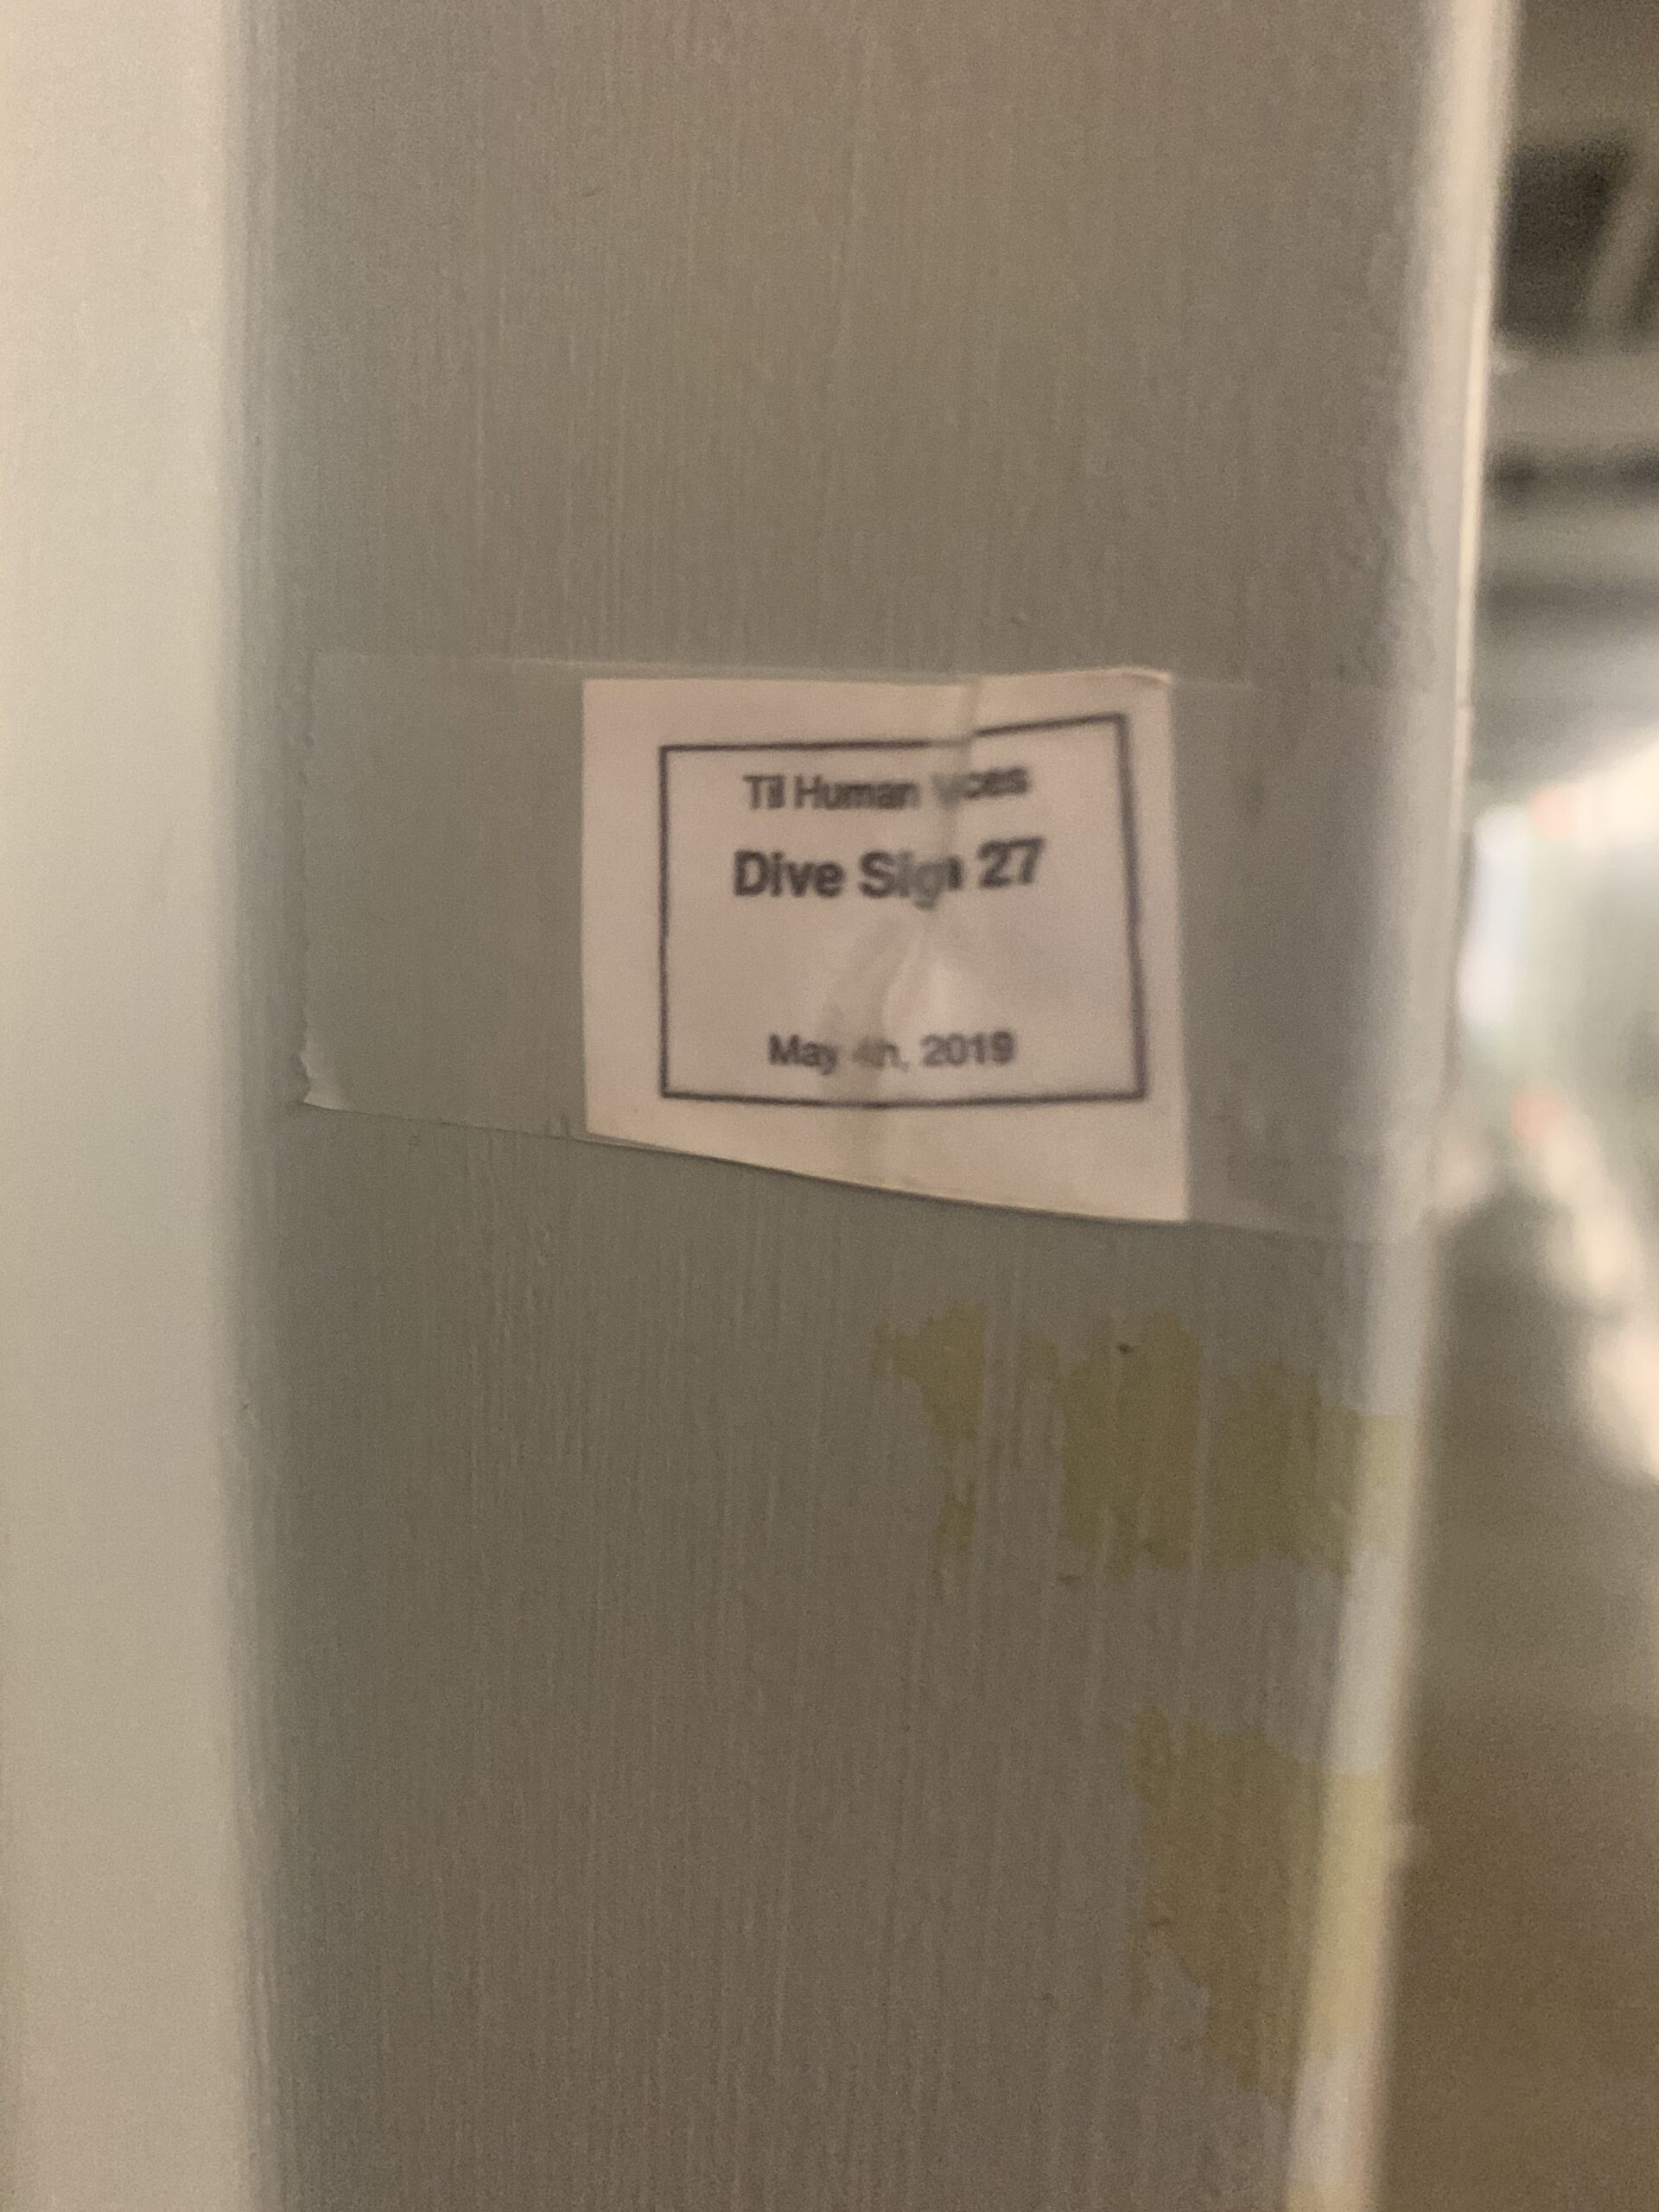 a small sign saying "Til Human Voices / Dive Sign 27 / May 4th, 2019"